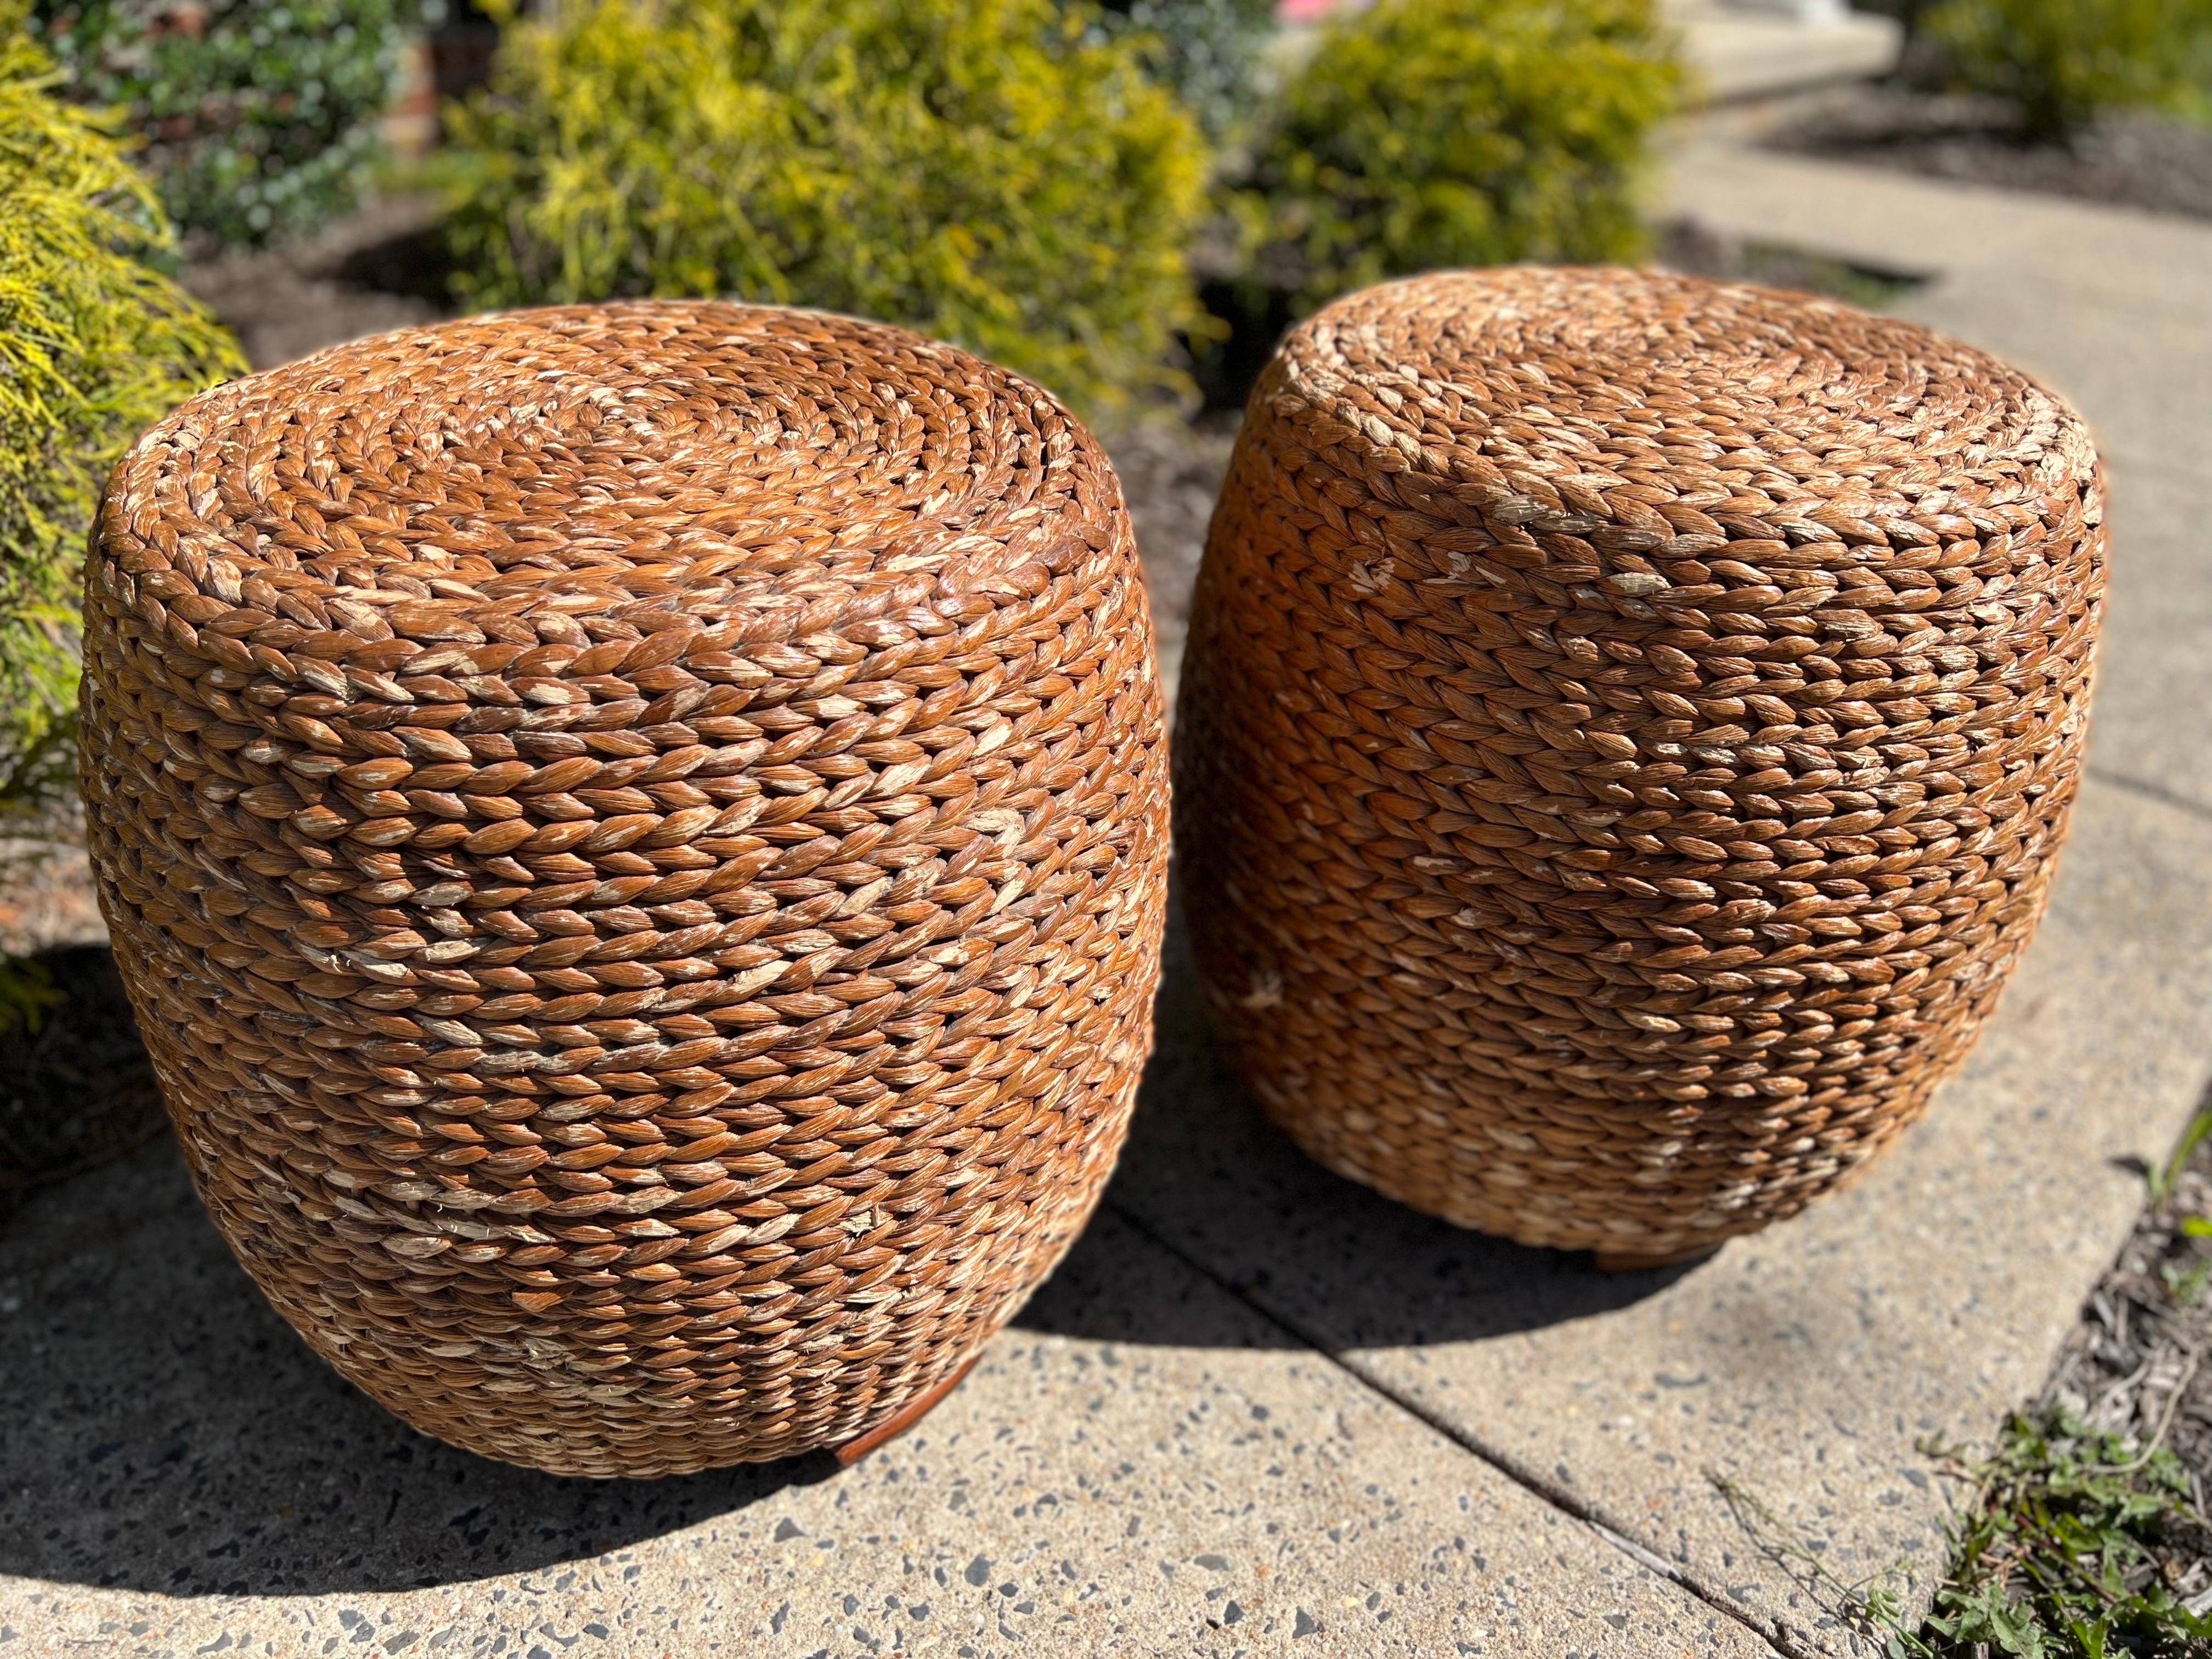 Versatile vintage braided rope stools or side tables with stacked wooden feet. Supported by a sturdy interior wood frame. These stools may serve many purposes and beautifully accent a variety of design styles. Perfect for adding warmth with natural